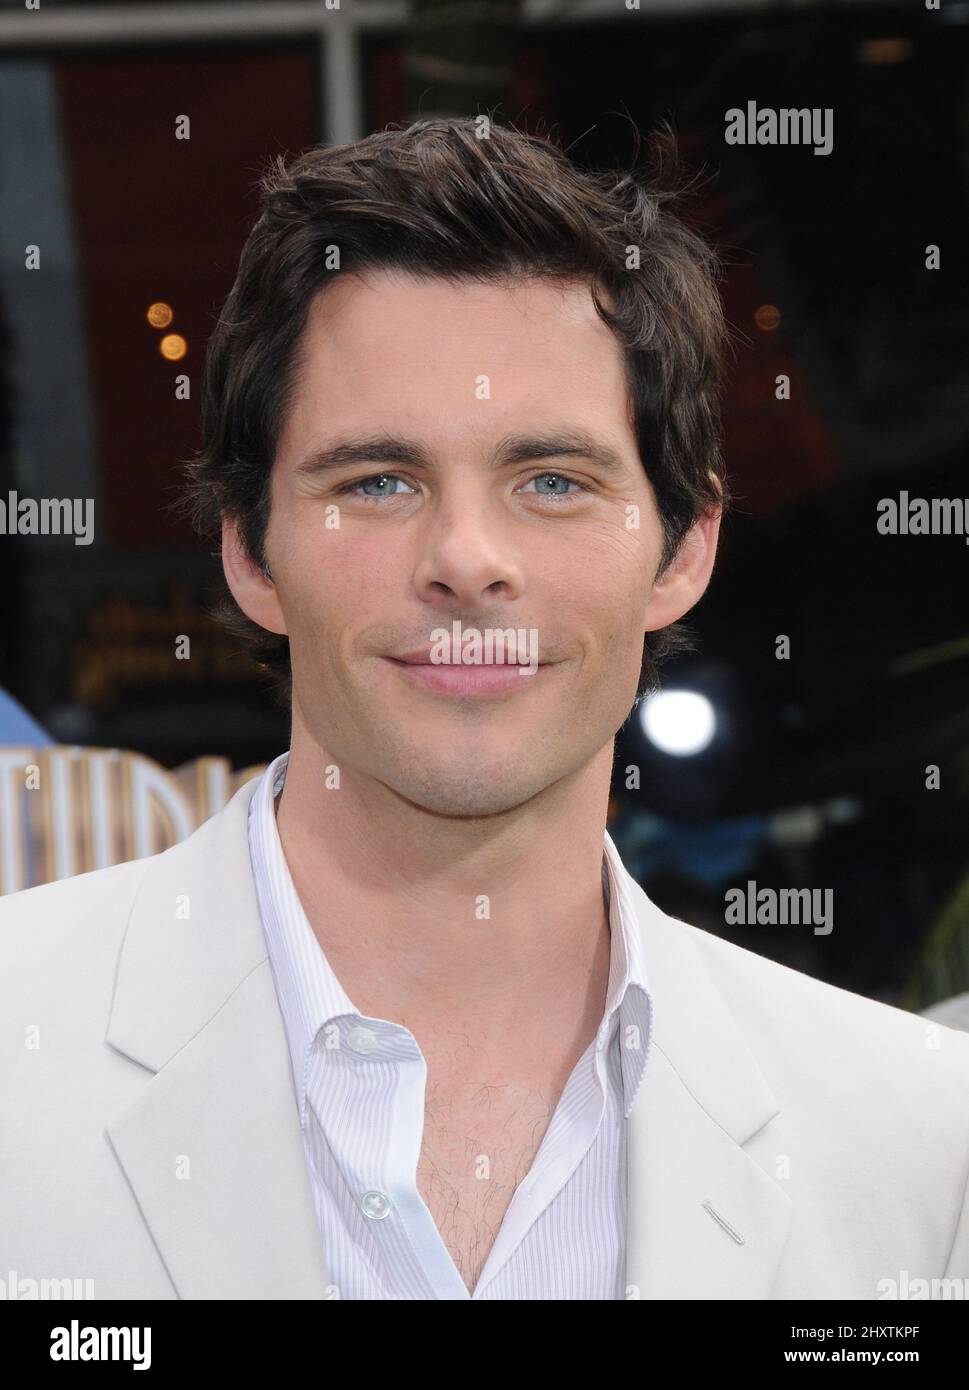 James Marsden during the premiere of the new movie from Universal Pictures HOP, held at Universal Studios Hollywood, Los Angeles Stock Photo